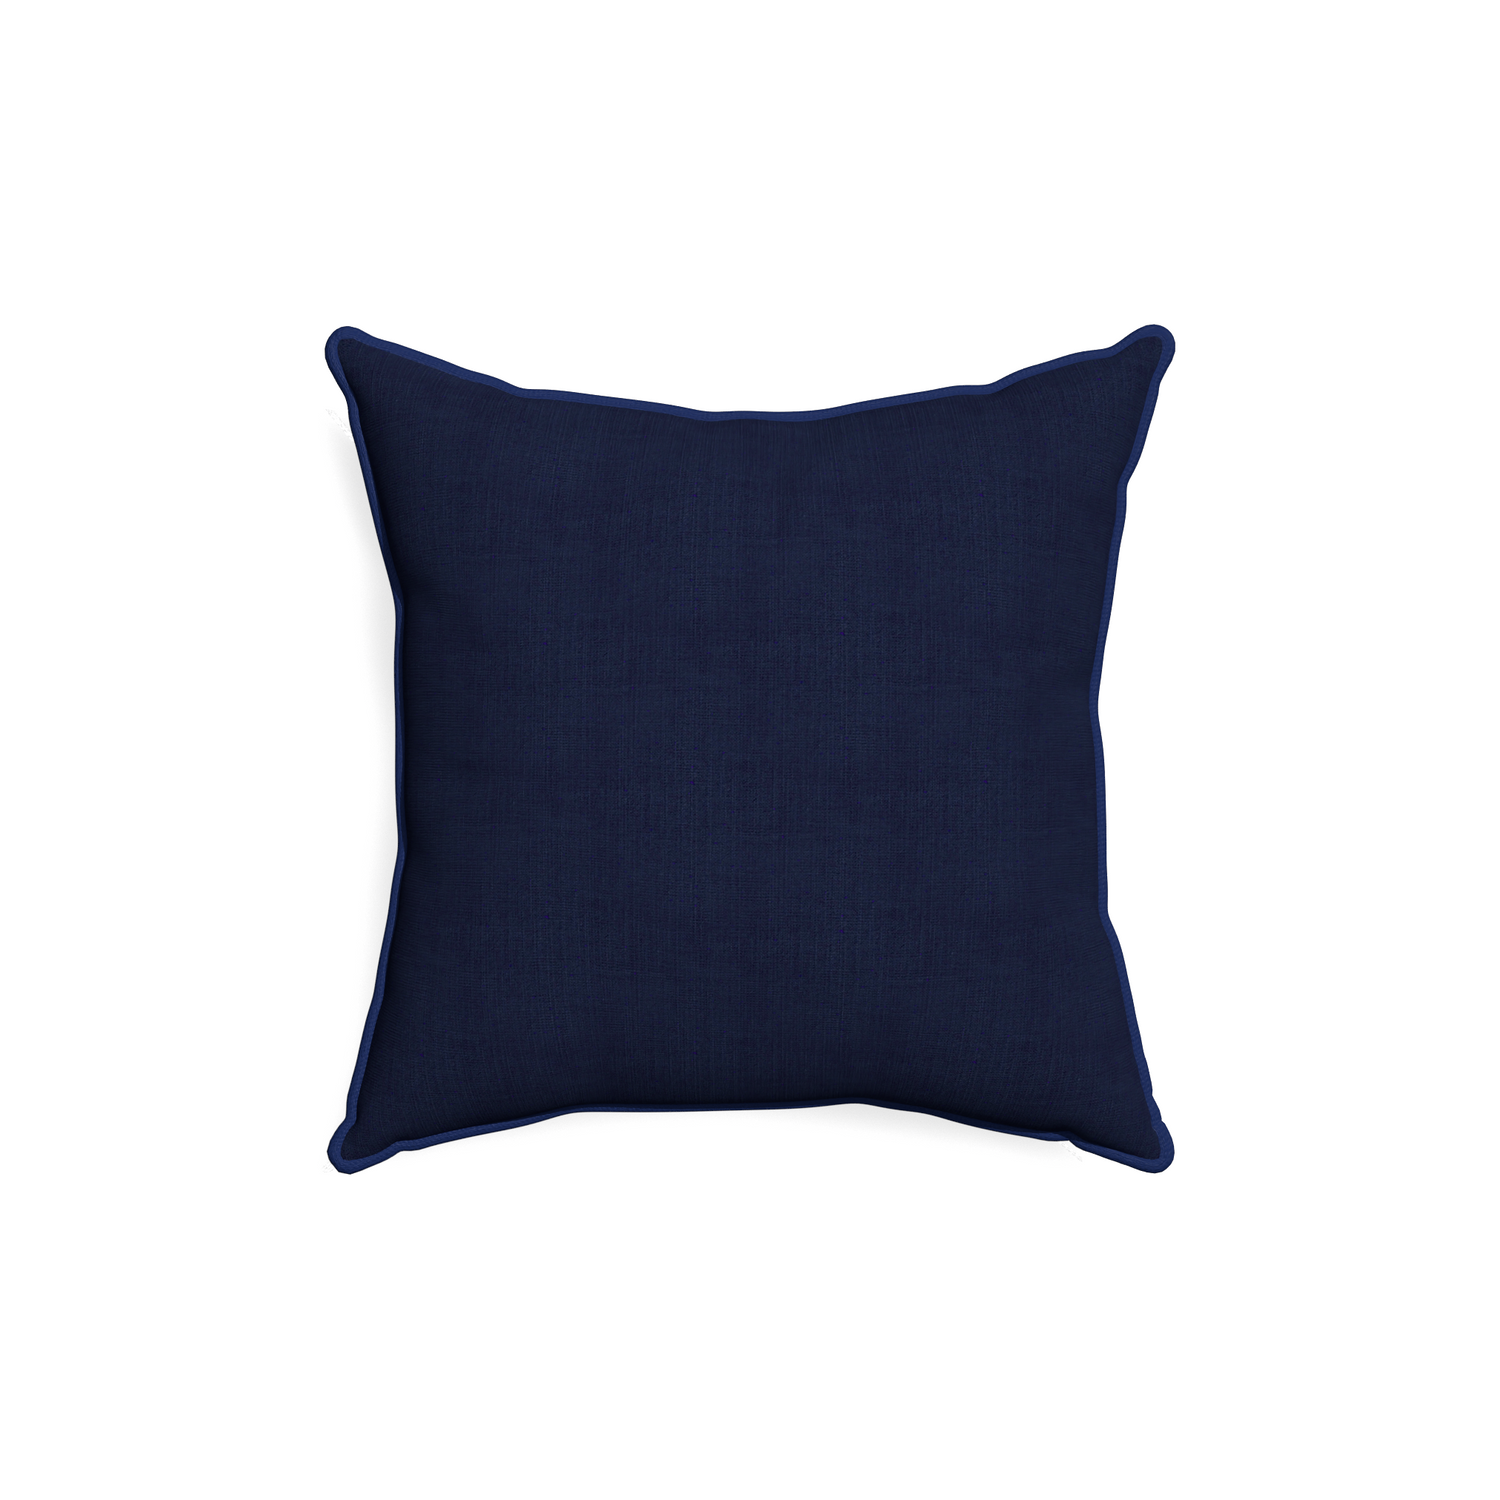 18-square midnight custom navy bluepillow with midnight piping on white background